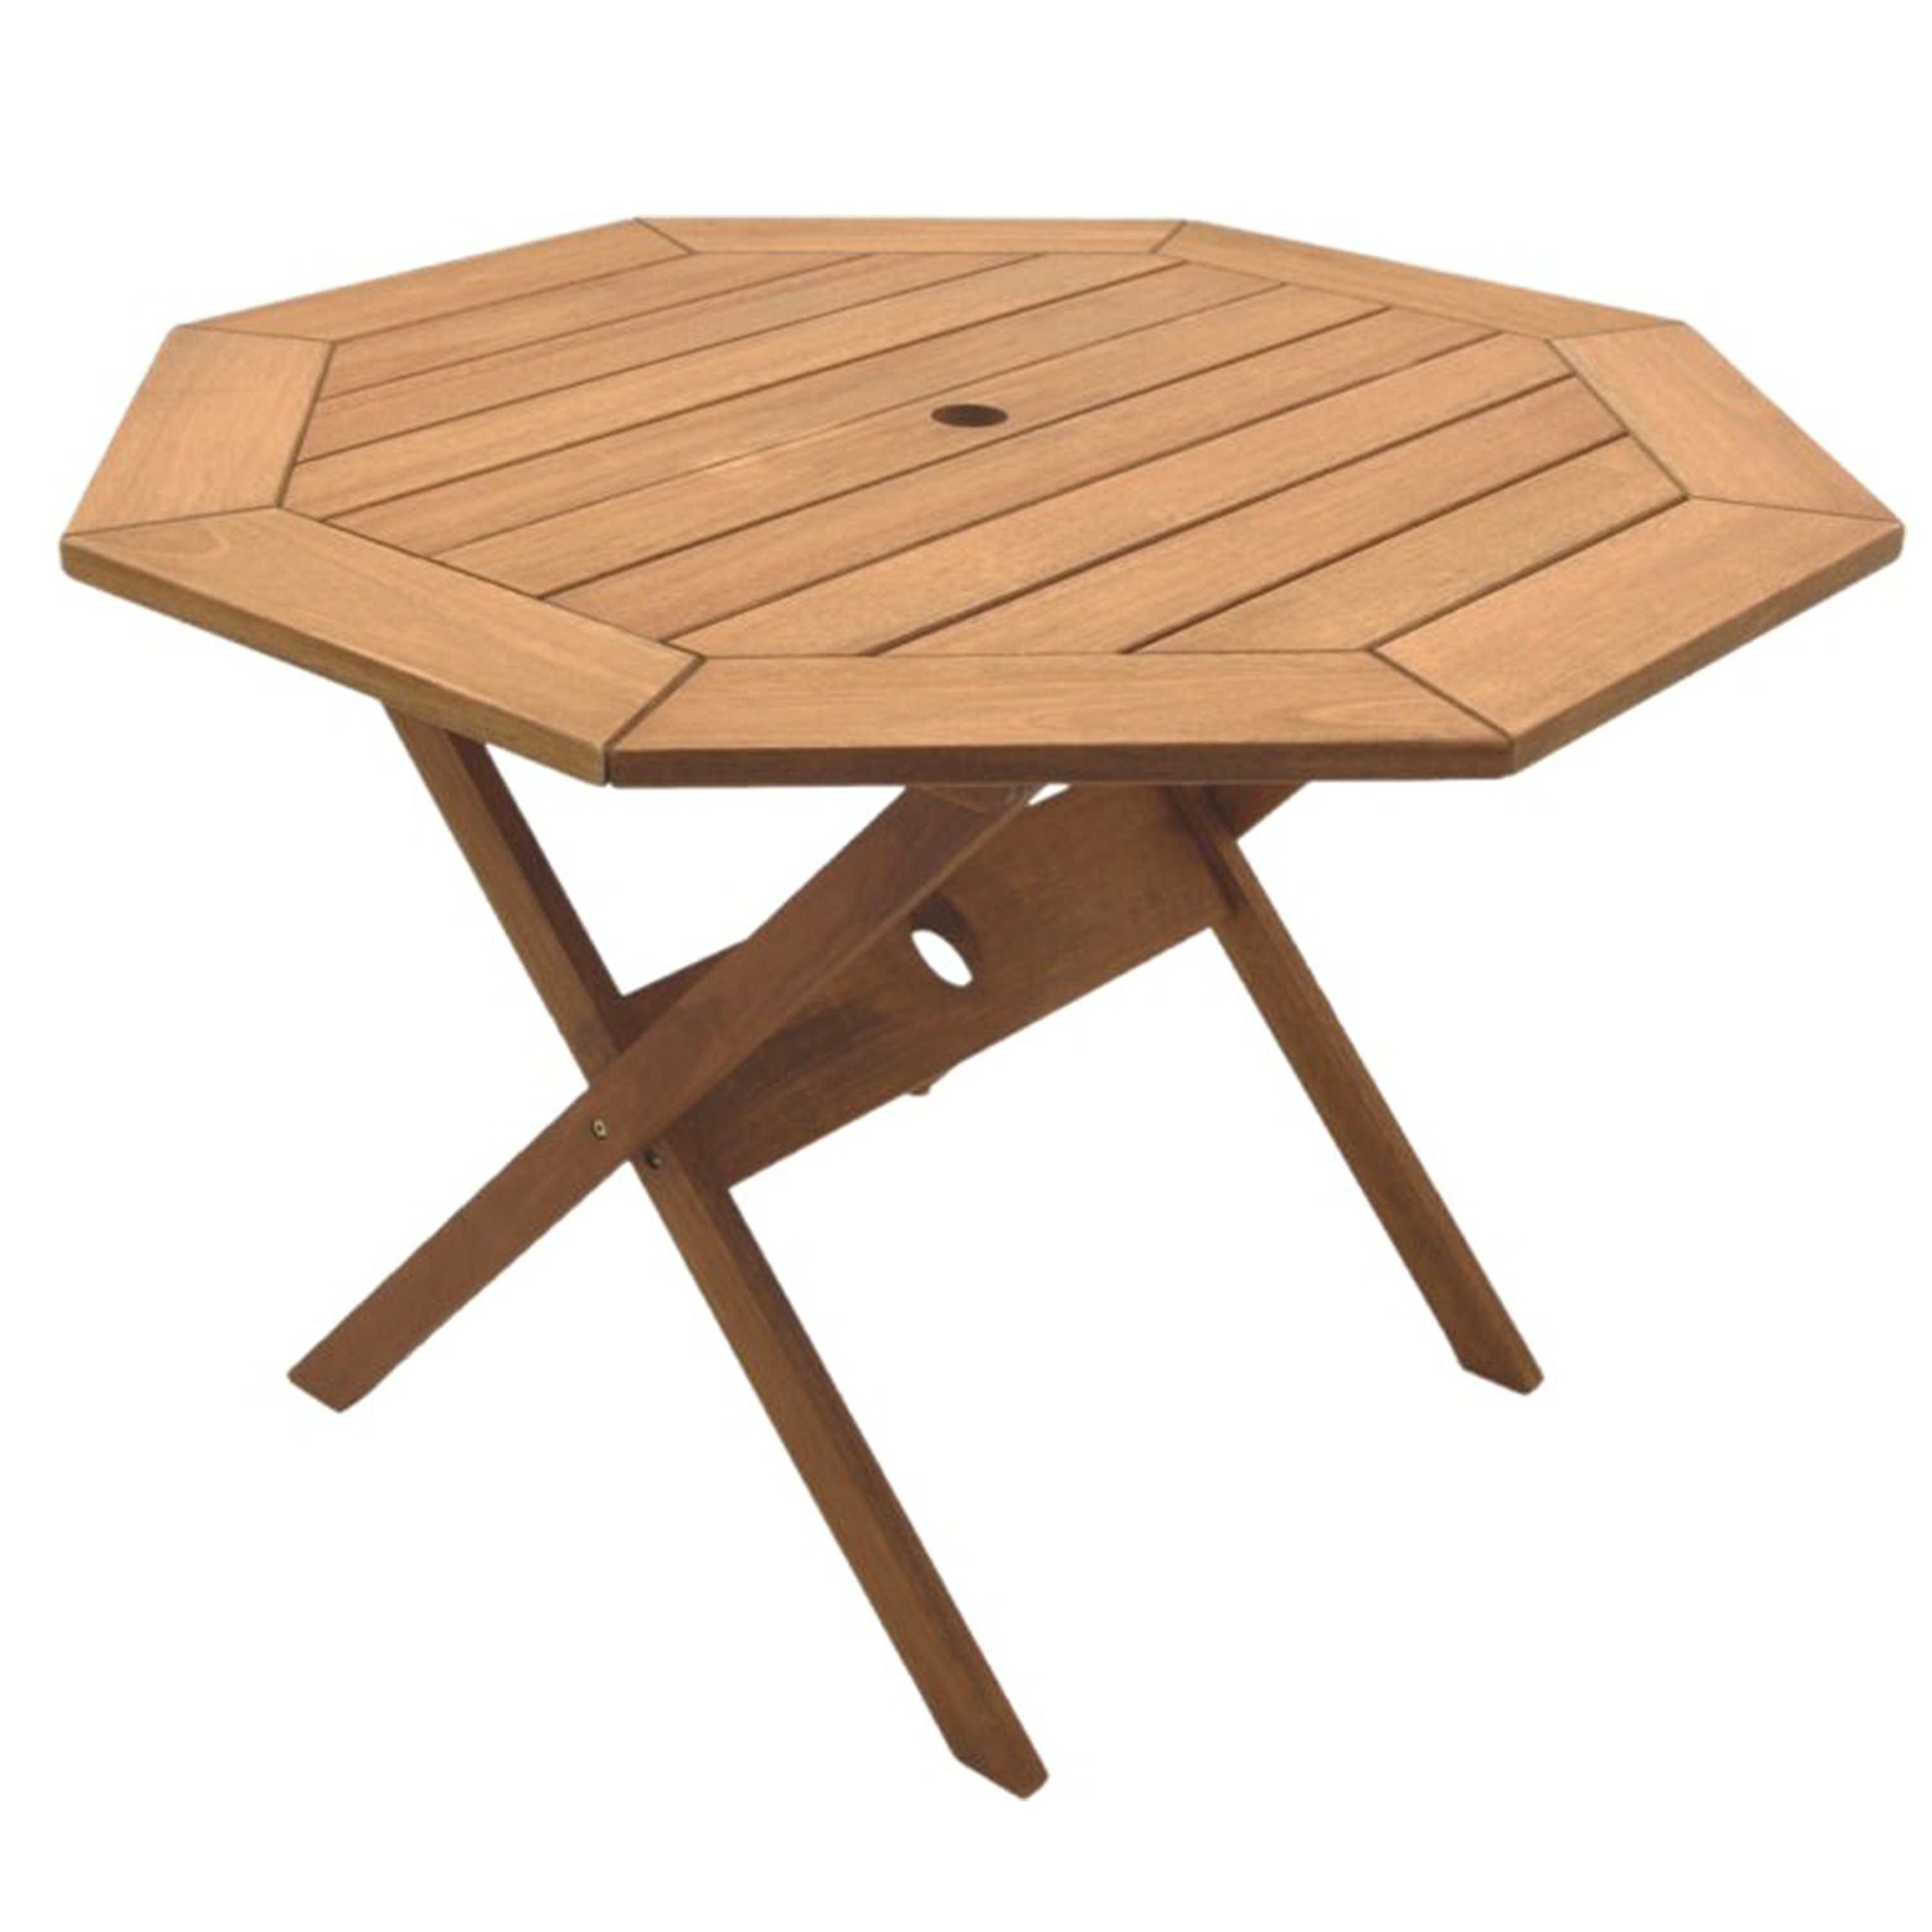 Amazonia Milano Octagonal Table | Eucalyptus Wood | Ideal for Outdoors and Indoors - image 1 of 3